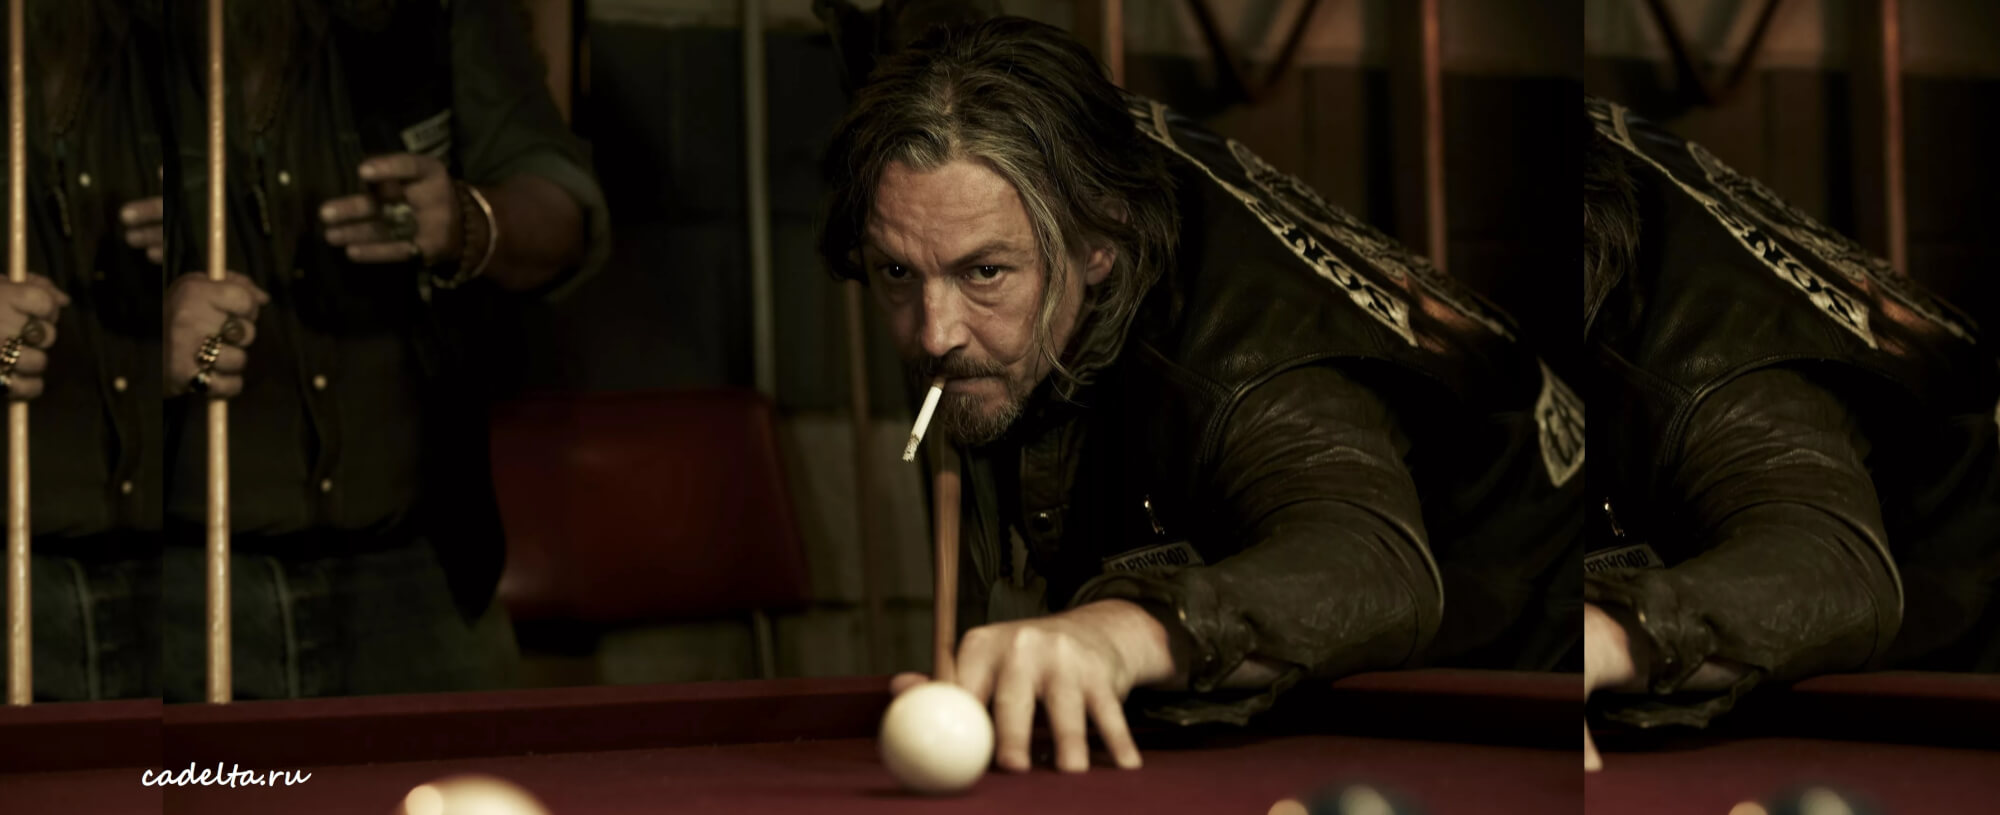 How did tommy flanagan get the scars on his face